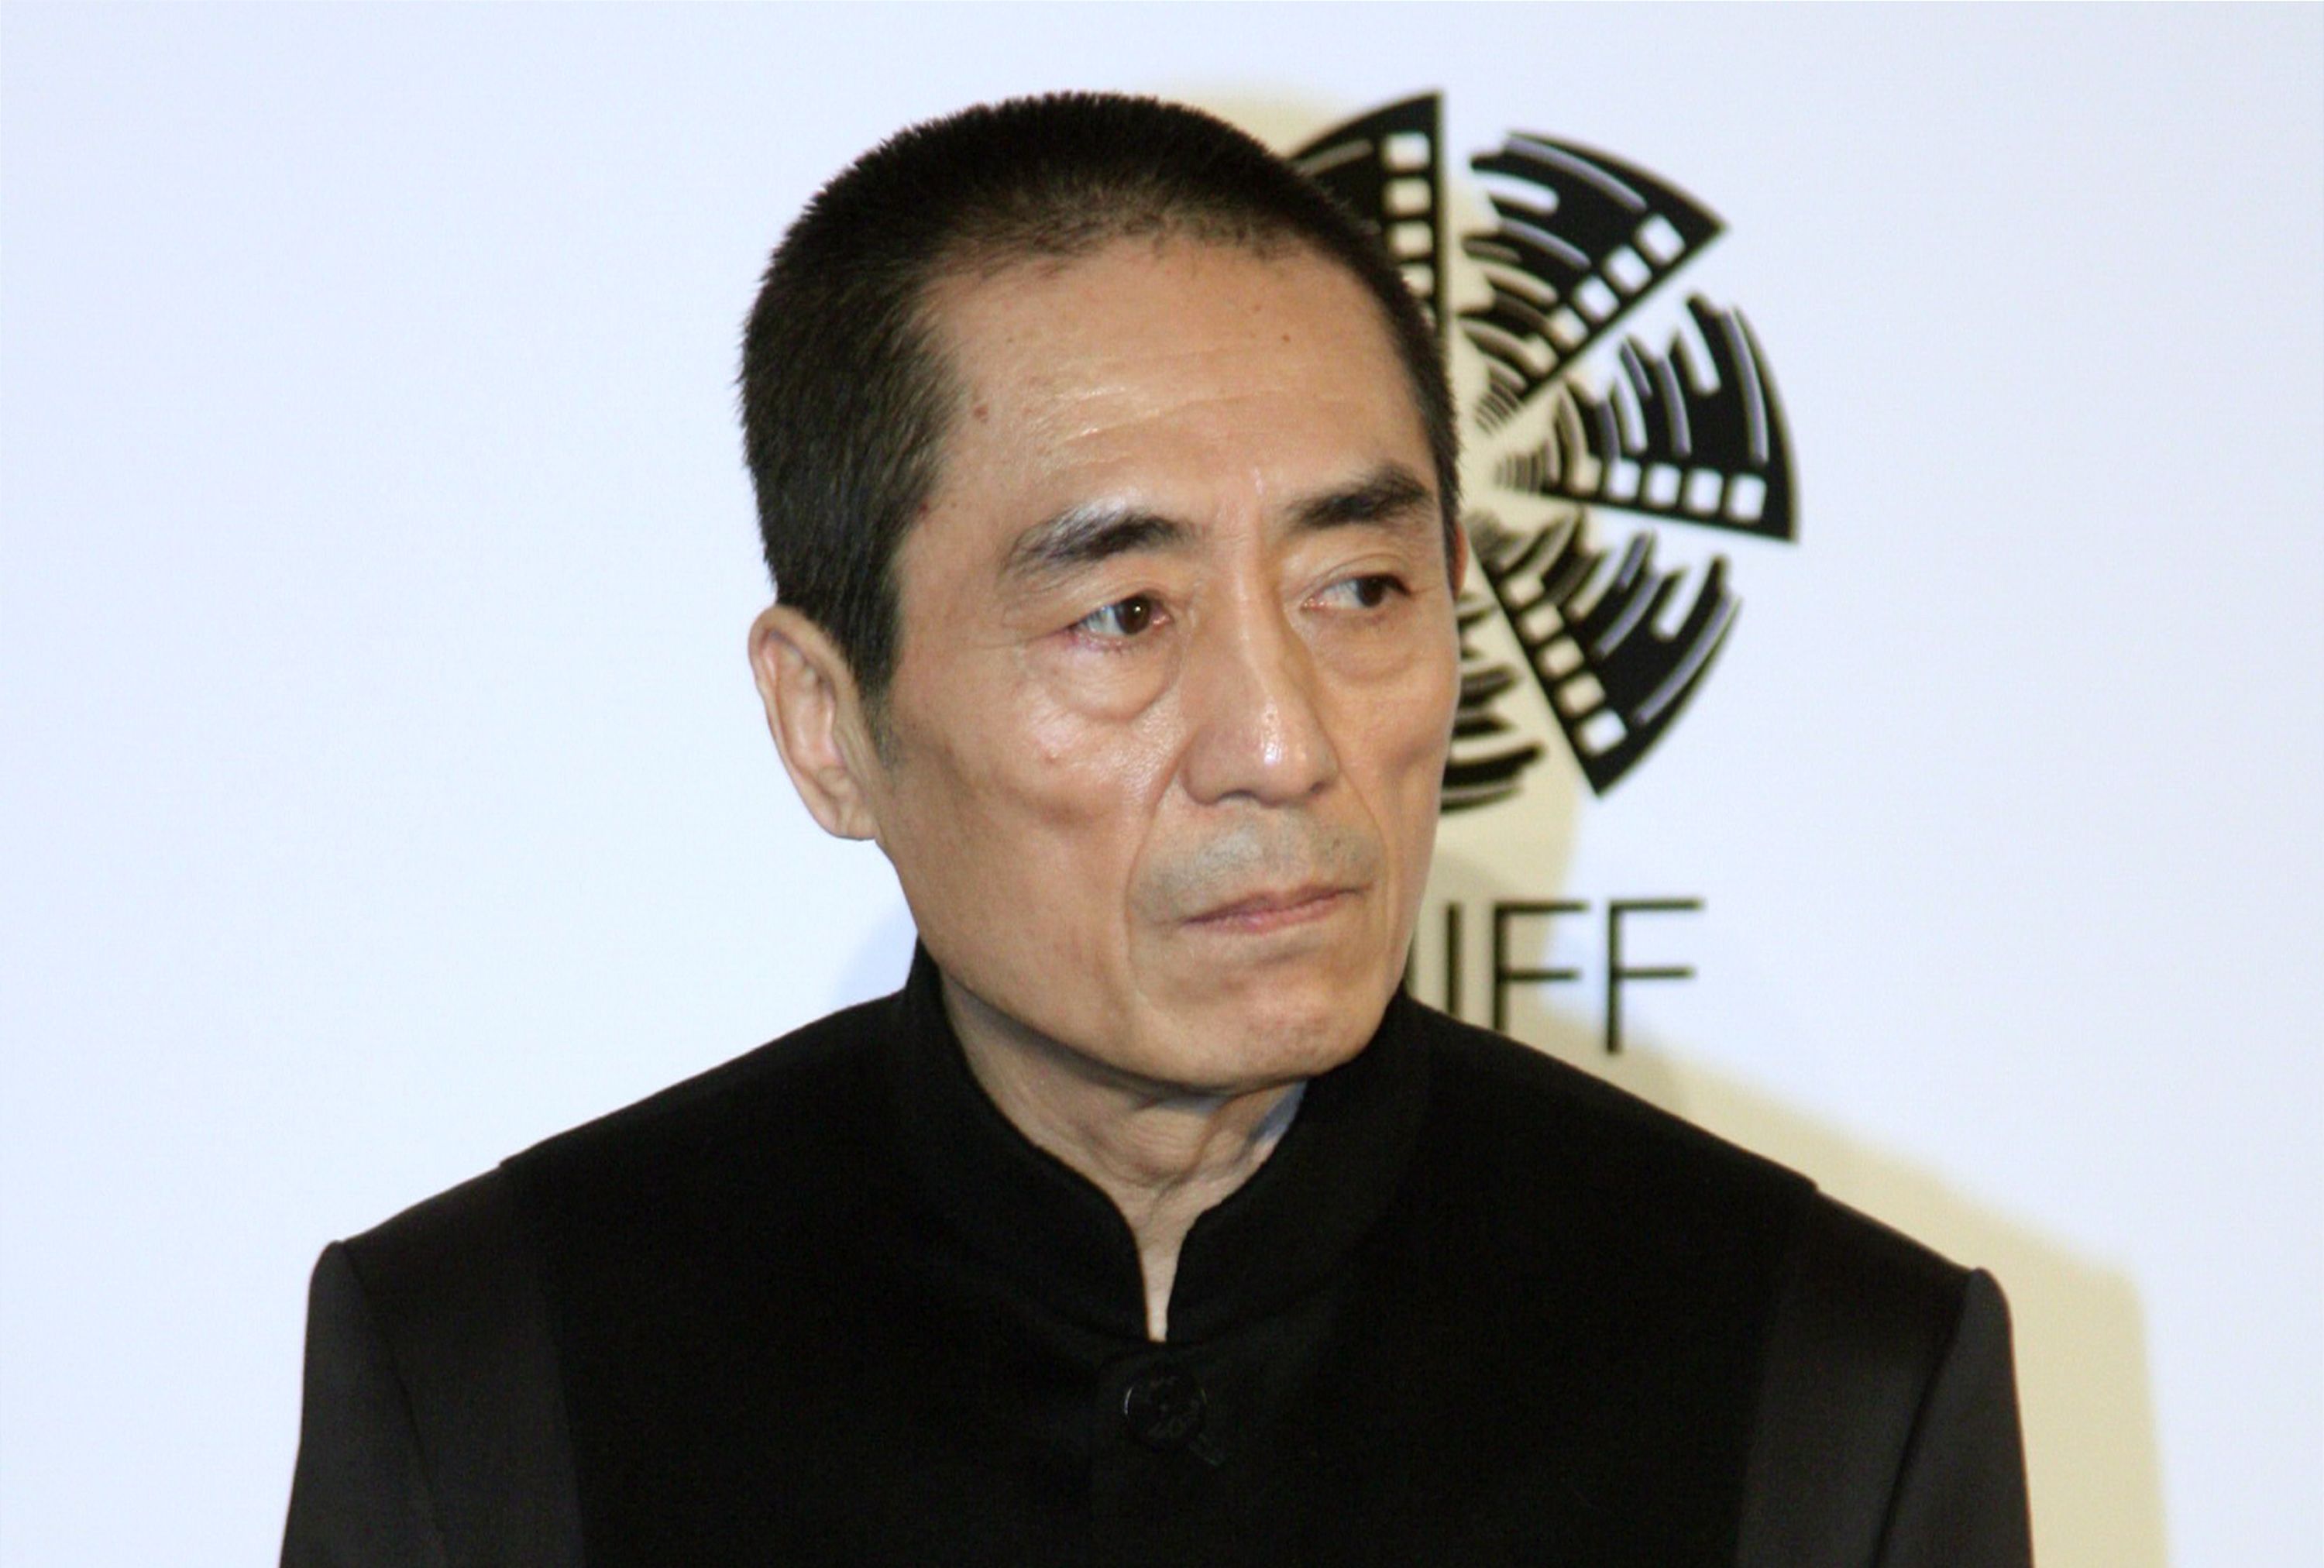 Zhang Yimou Net Worth - Exploring The Wealth Of A Filmmaker